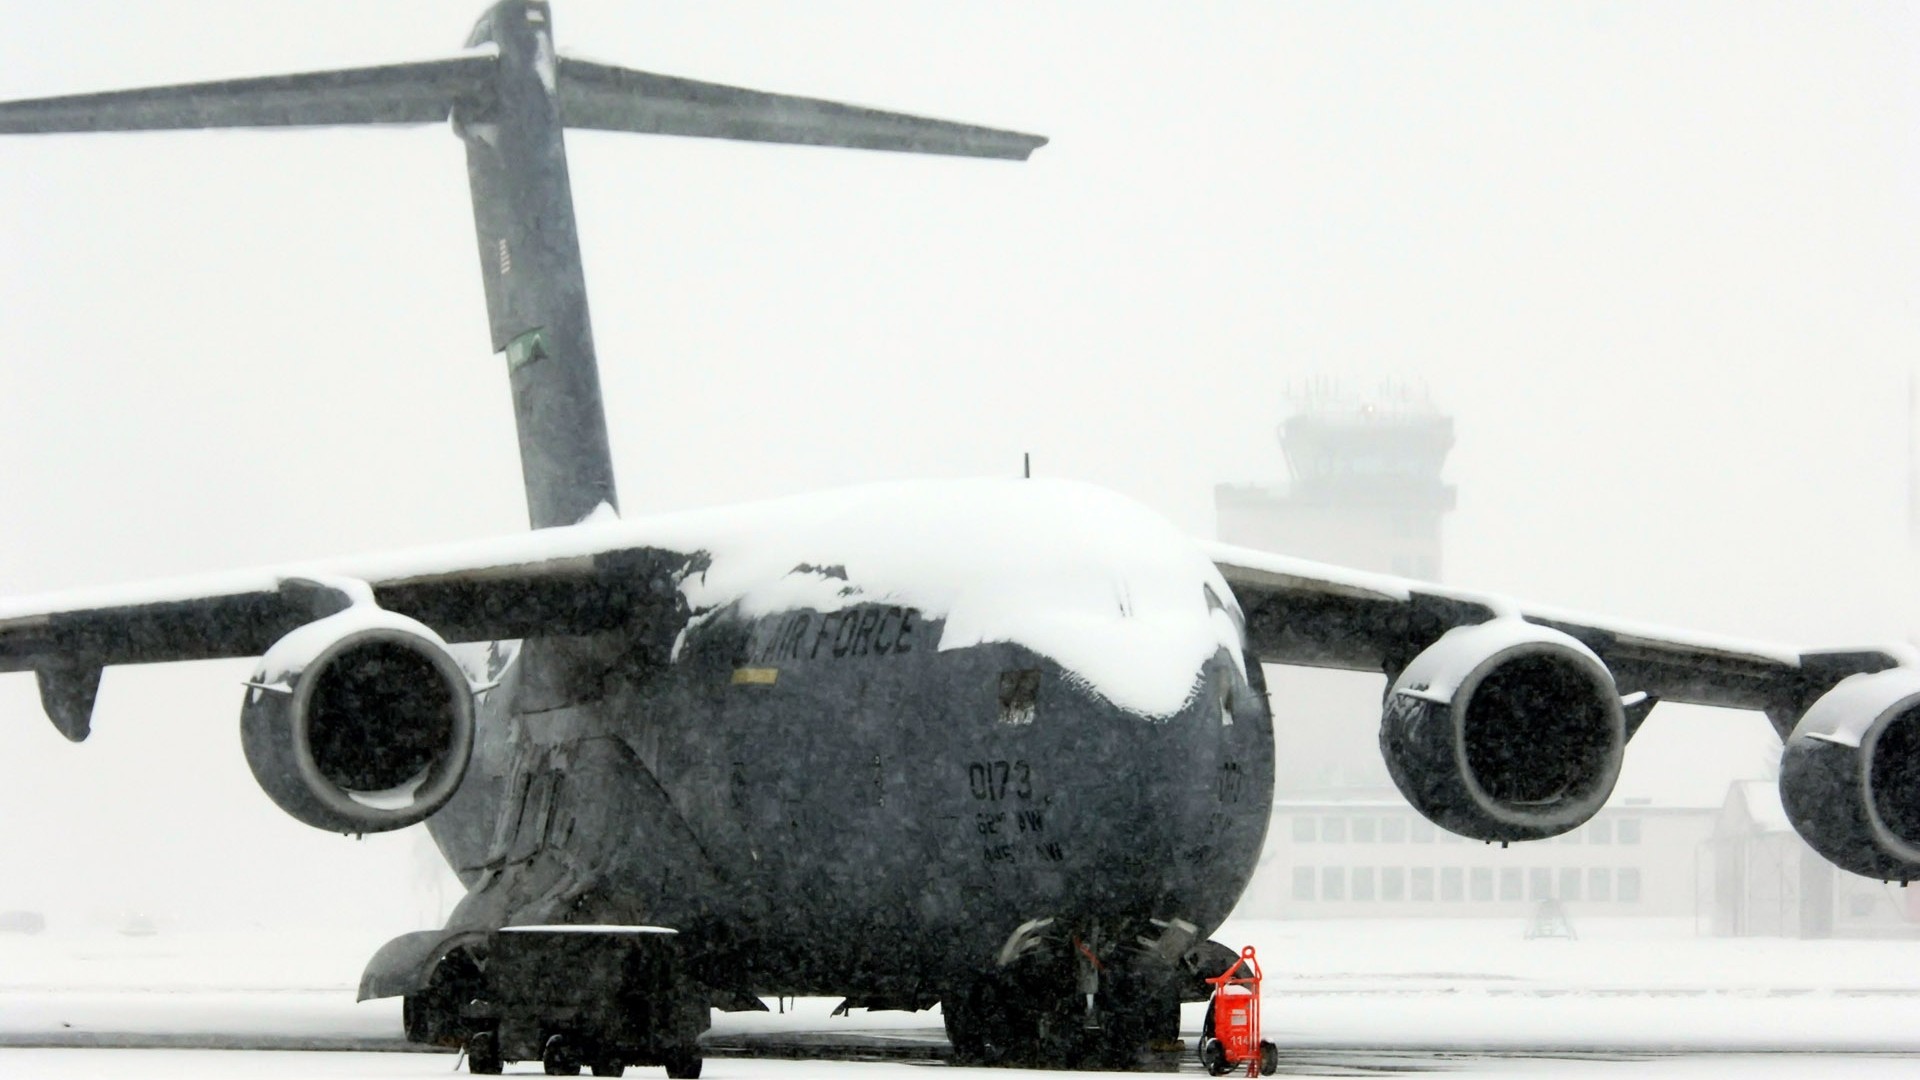 General 1920x1080 military aircraft airplane Boeing C-17 Globemaster III military aircraft vehicle military vehicle snowing snow covered American aircraft snow jets frontal view